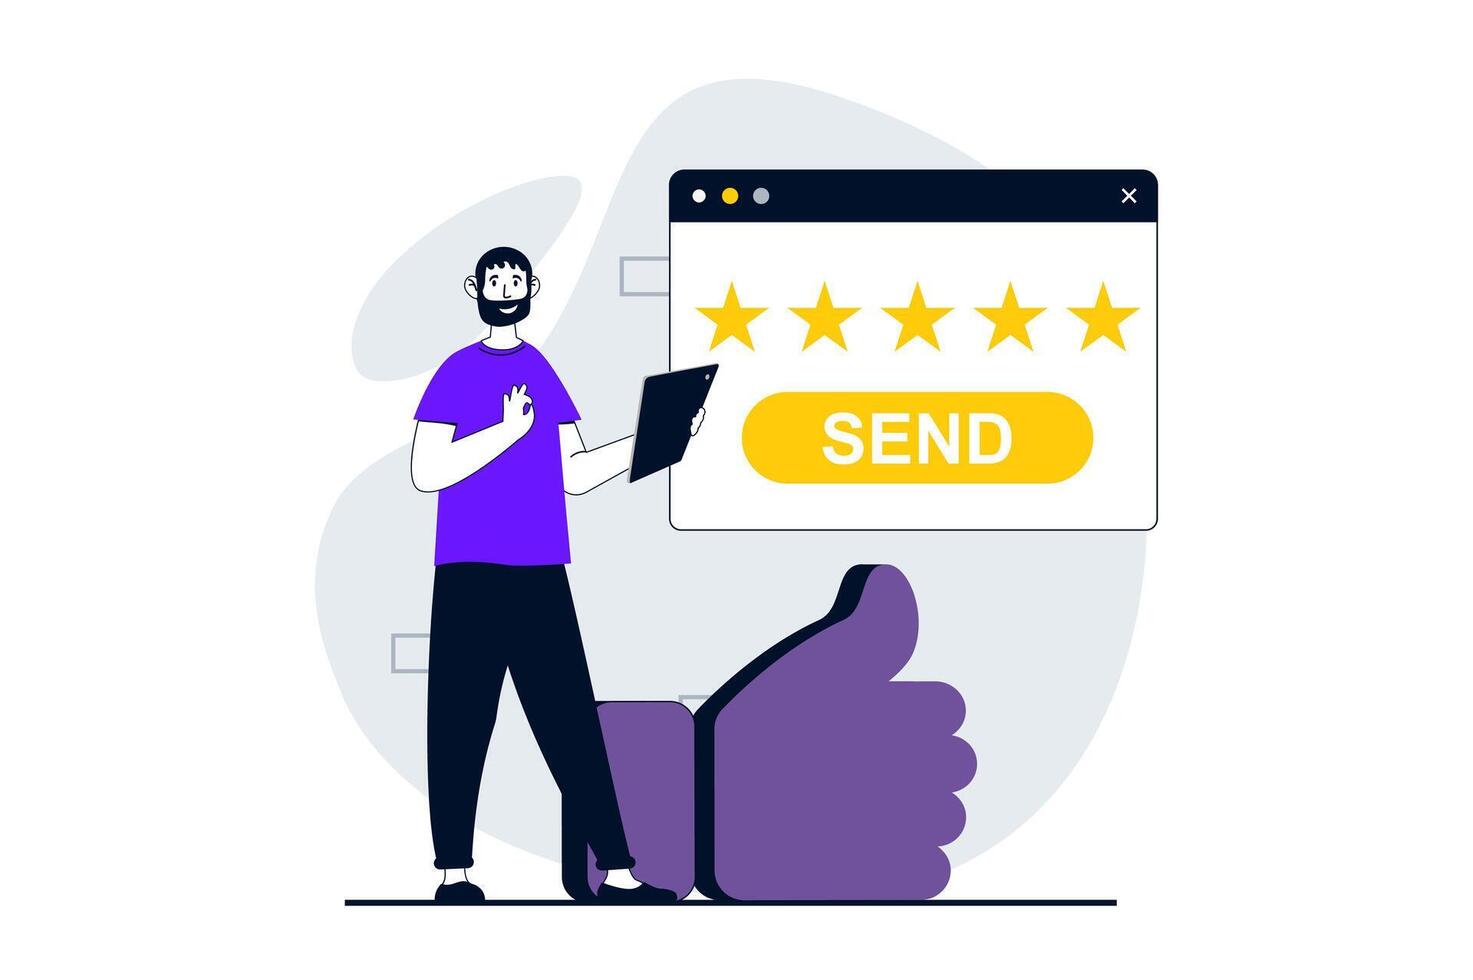 Feedback page concept with people scene in flat design for web. Man sending client experience review and user rating with five stars. Vector illustration for social media banner, marketing material.